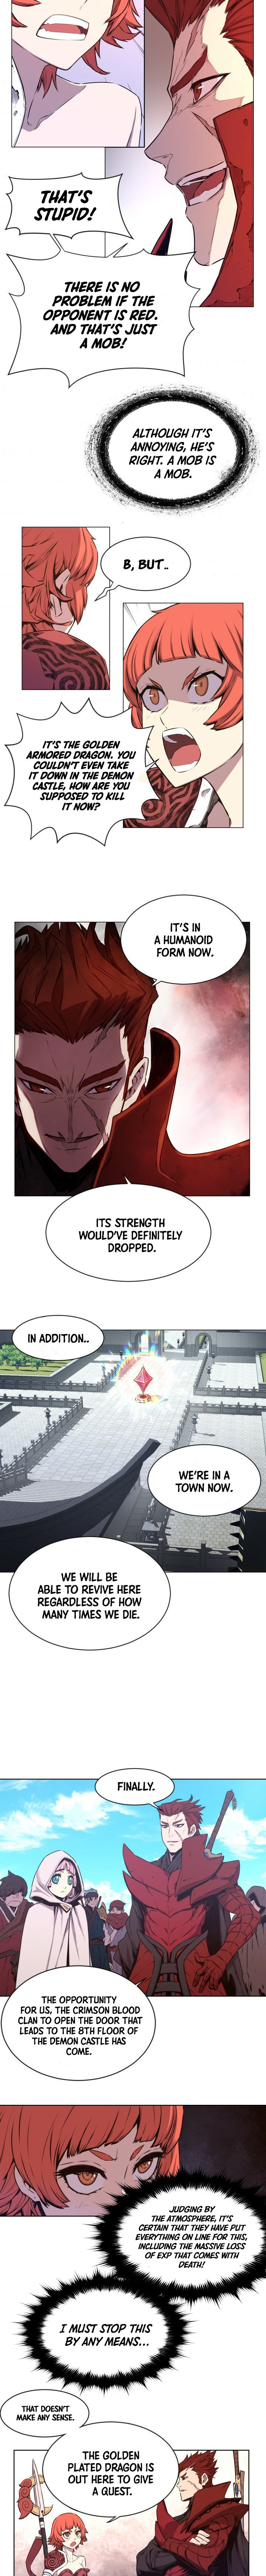 Legend of Mir: Gold Armored Dragon - Chapter 4 Page 9